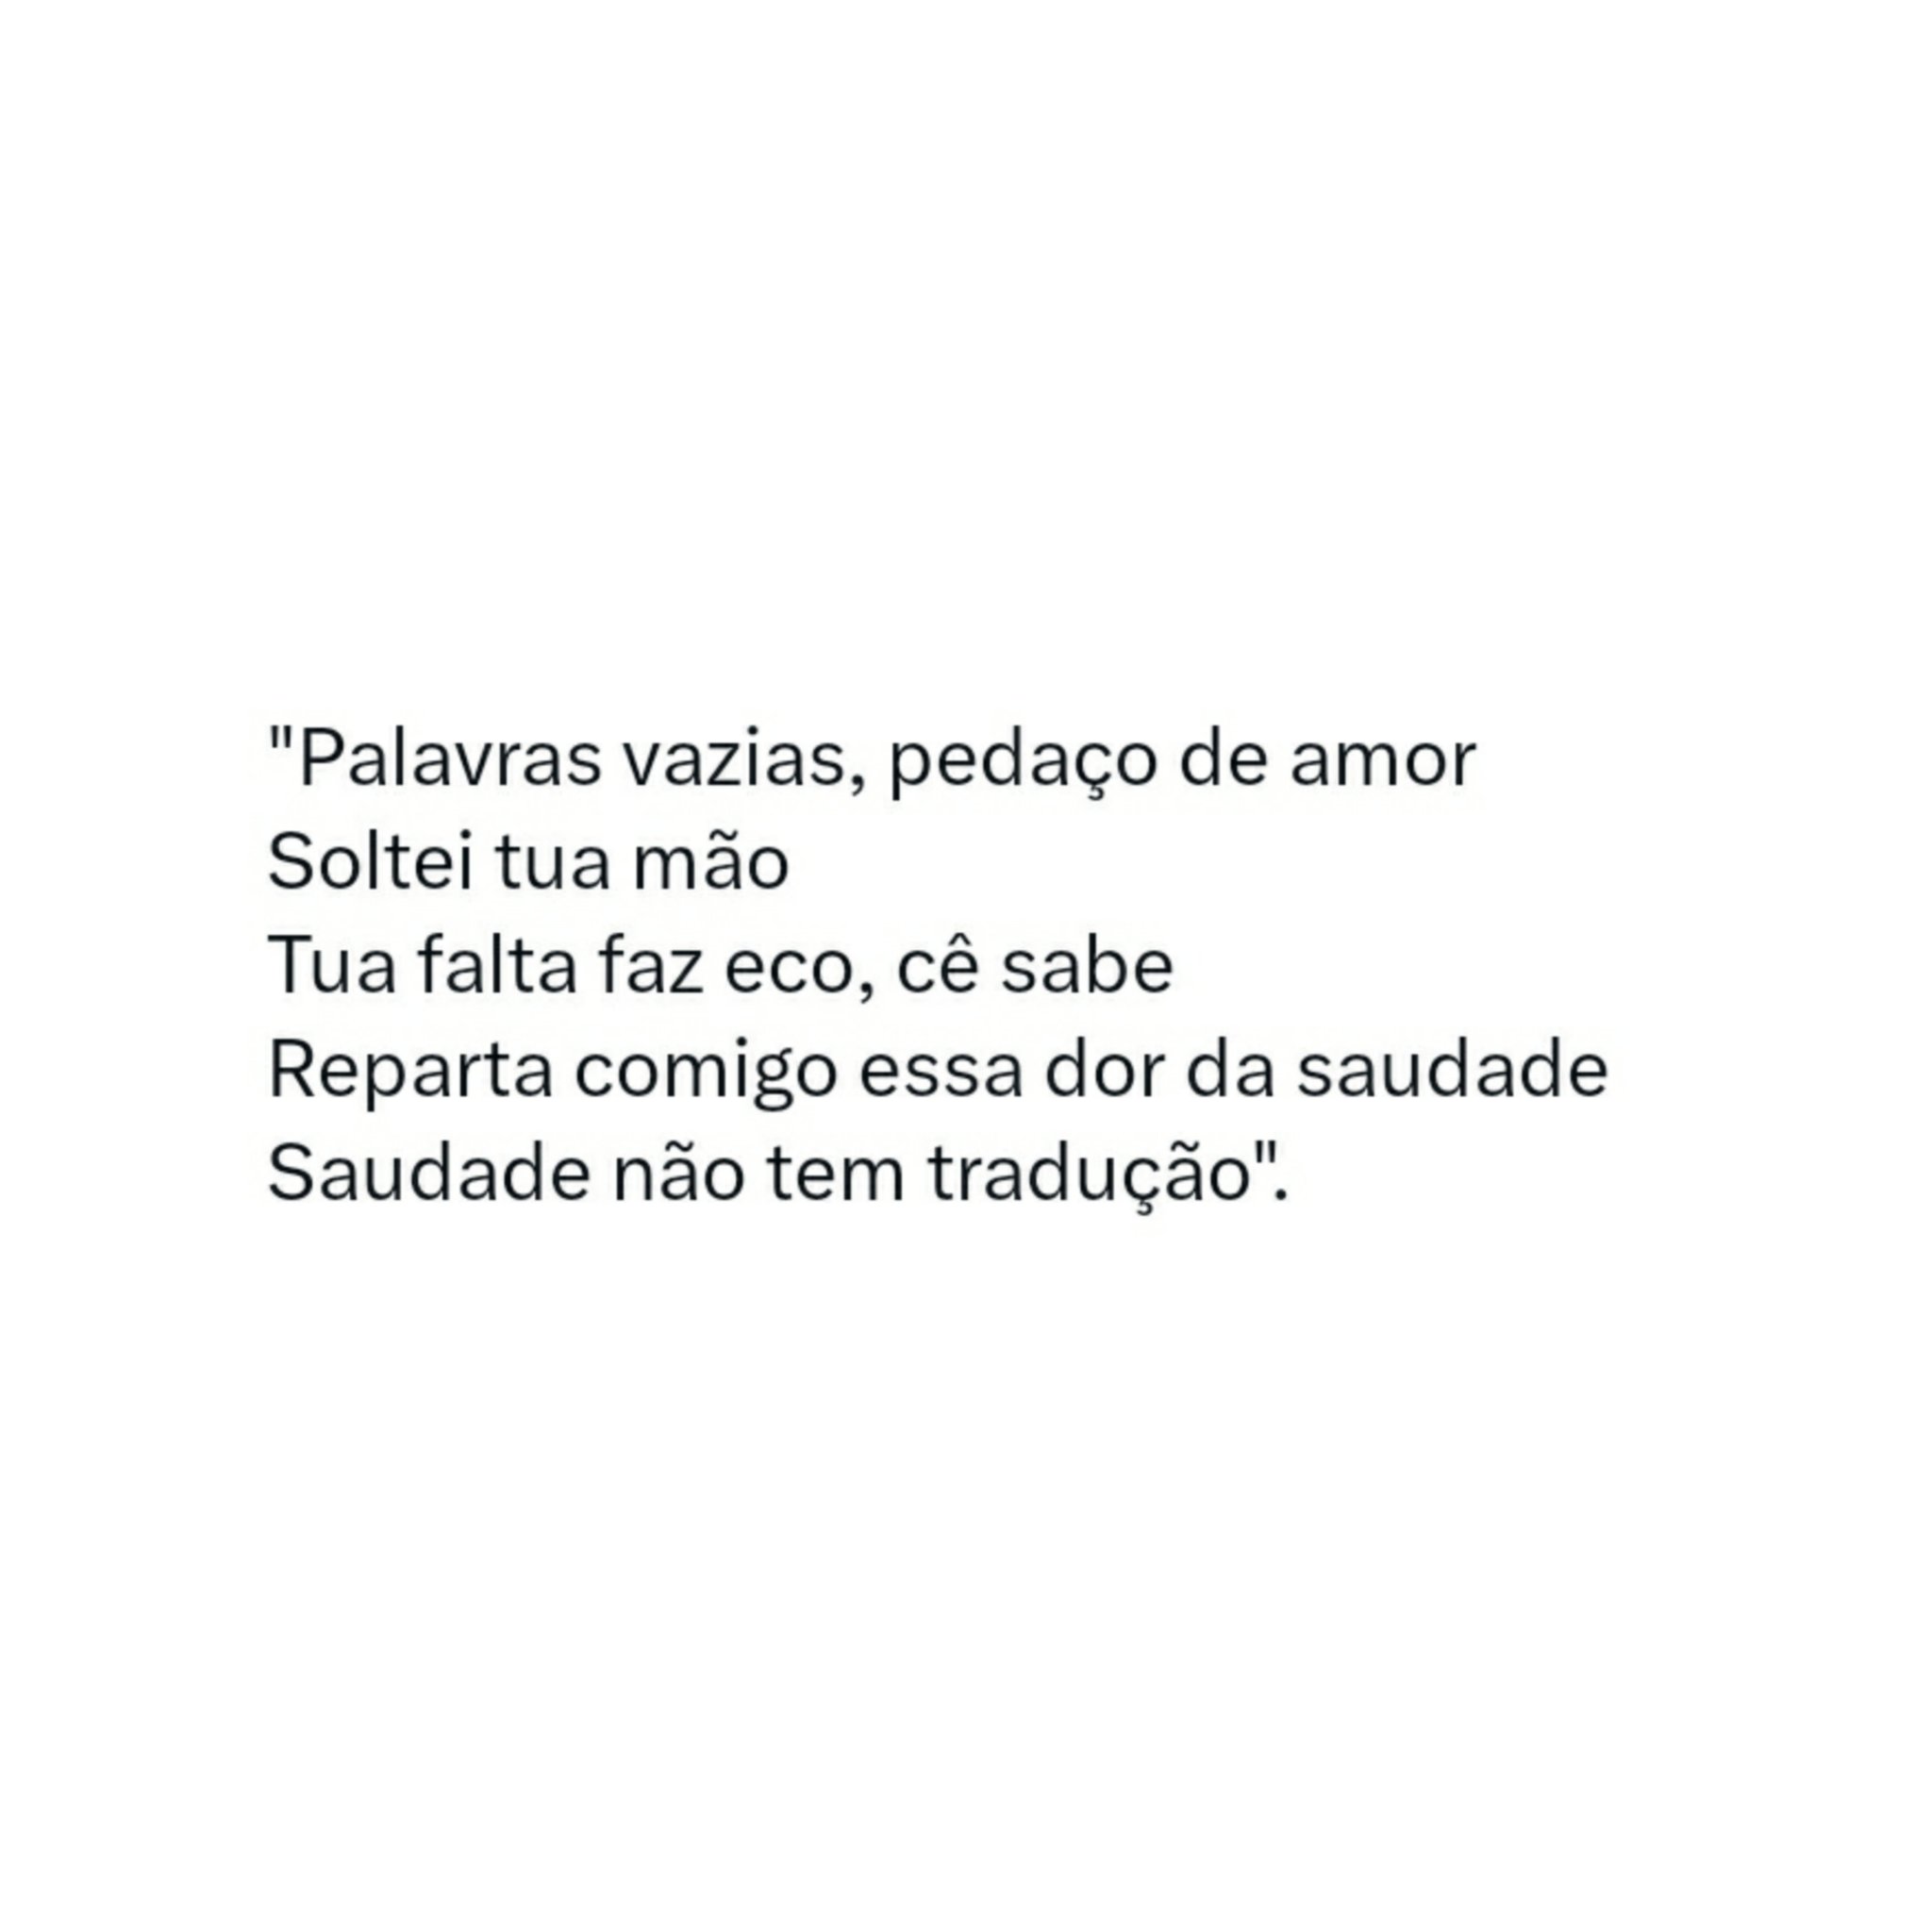 One Word Quote, saudade in 2023